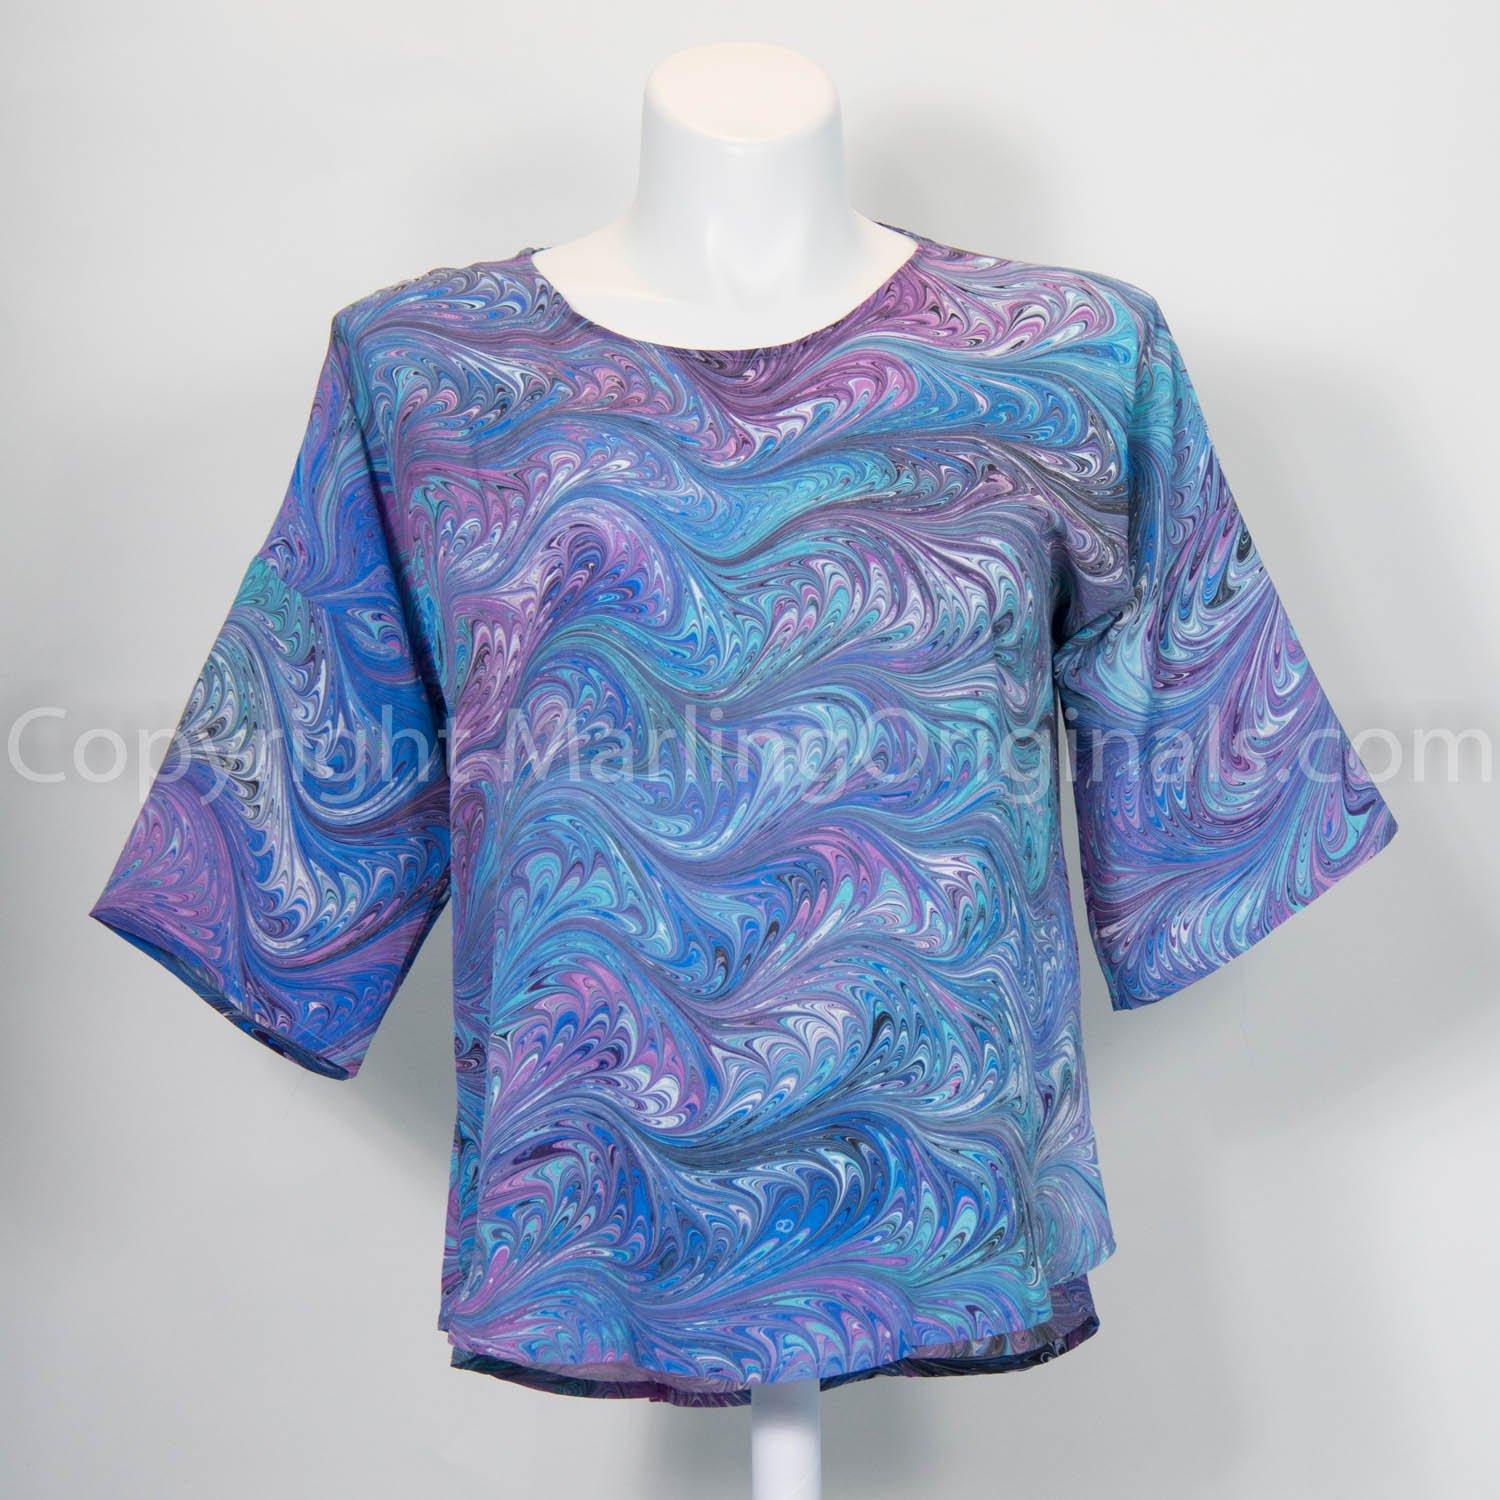 marbled blue silk top with artistic feathered patter in blues, violet, aqua.  Round neck and hemline